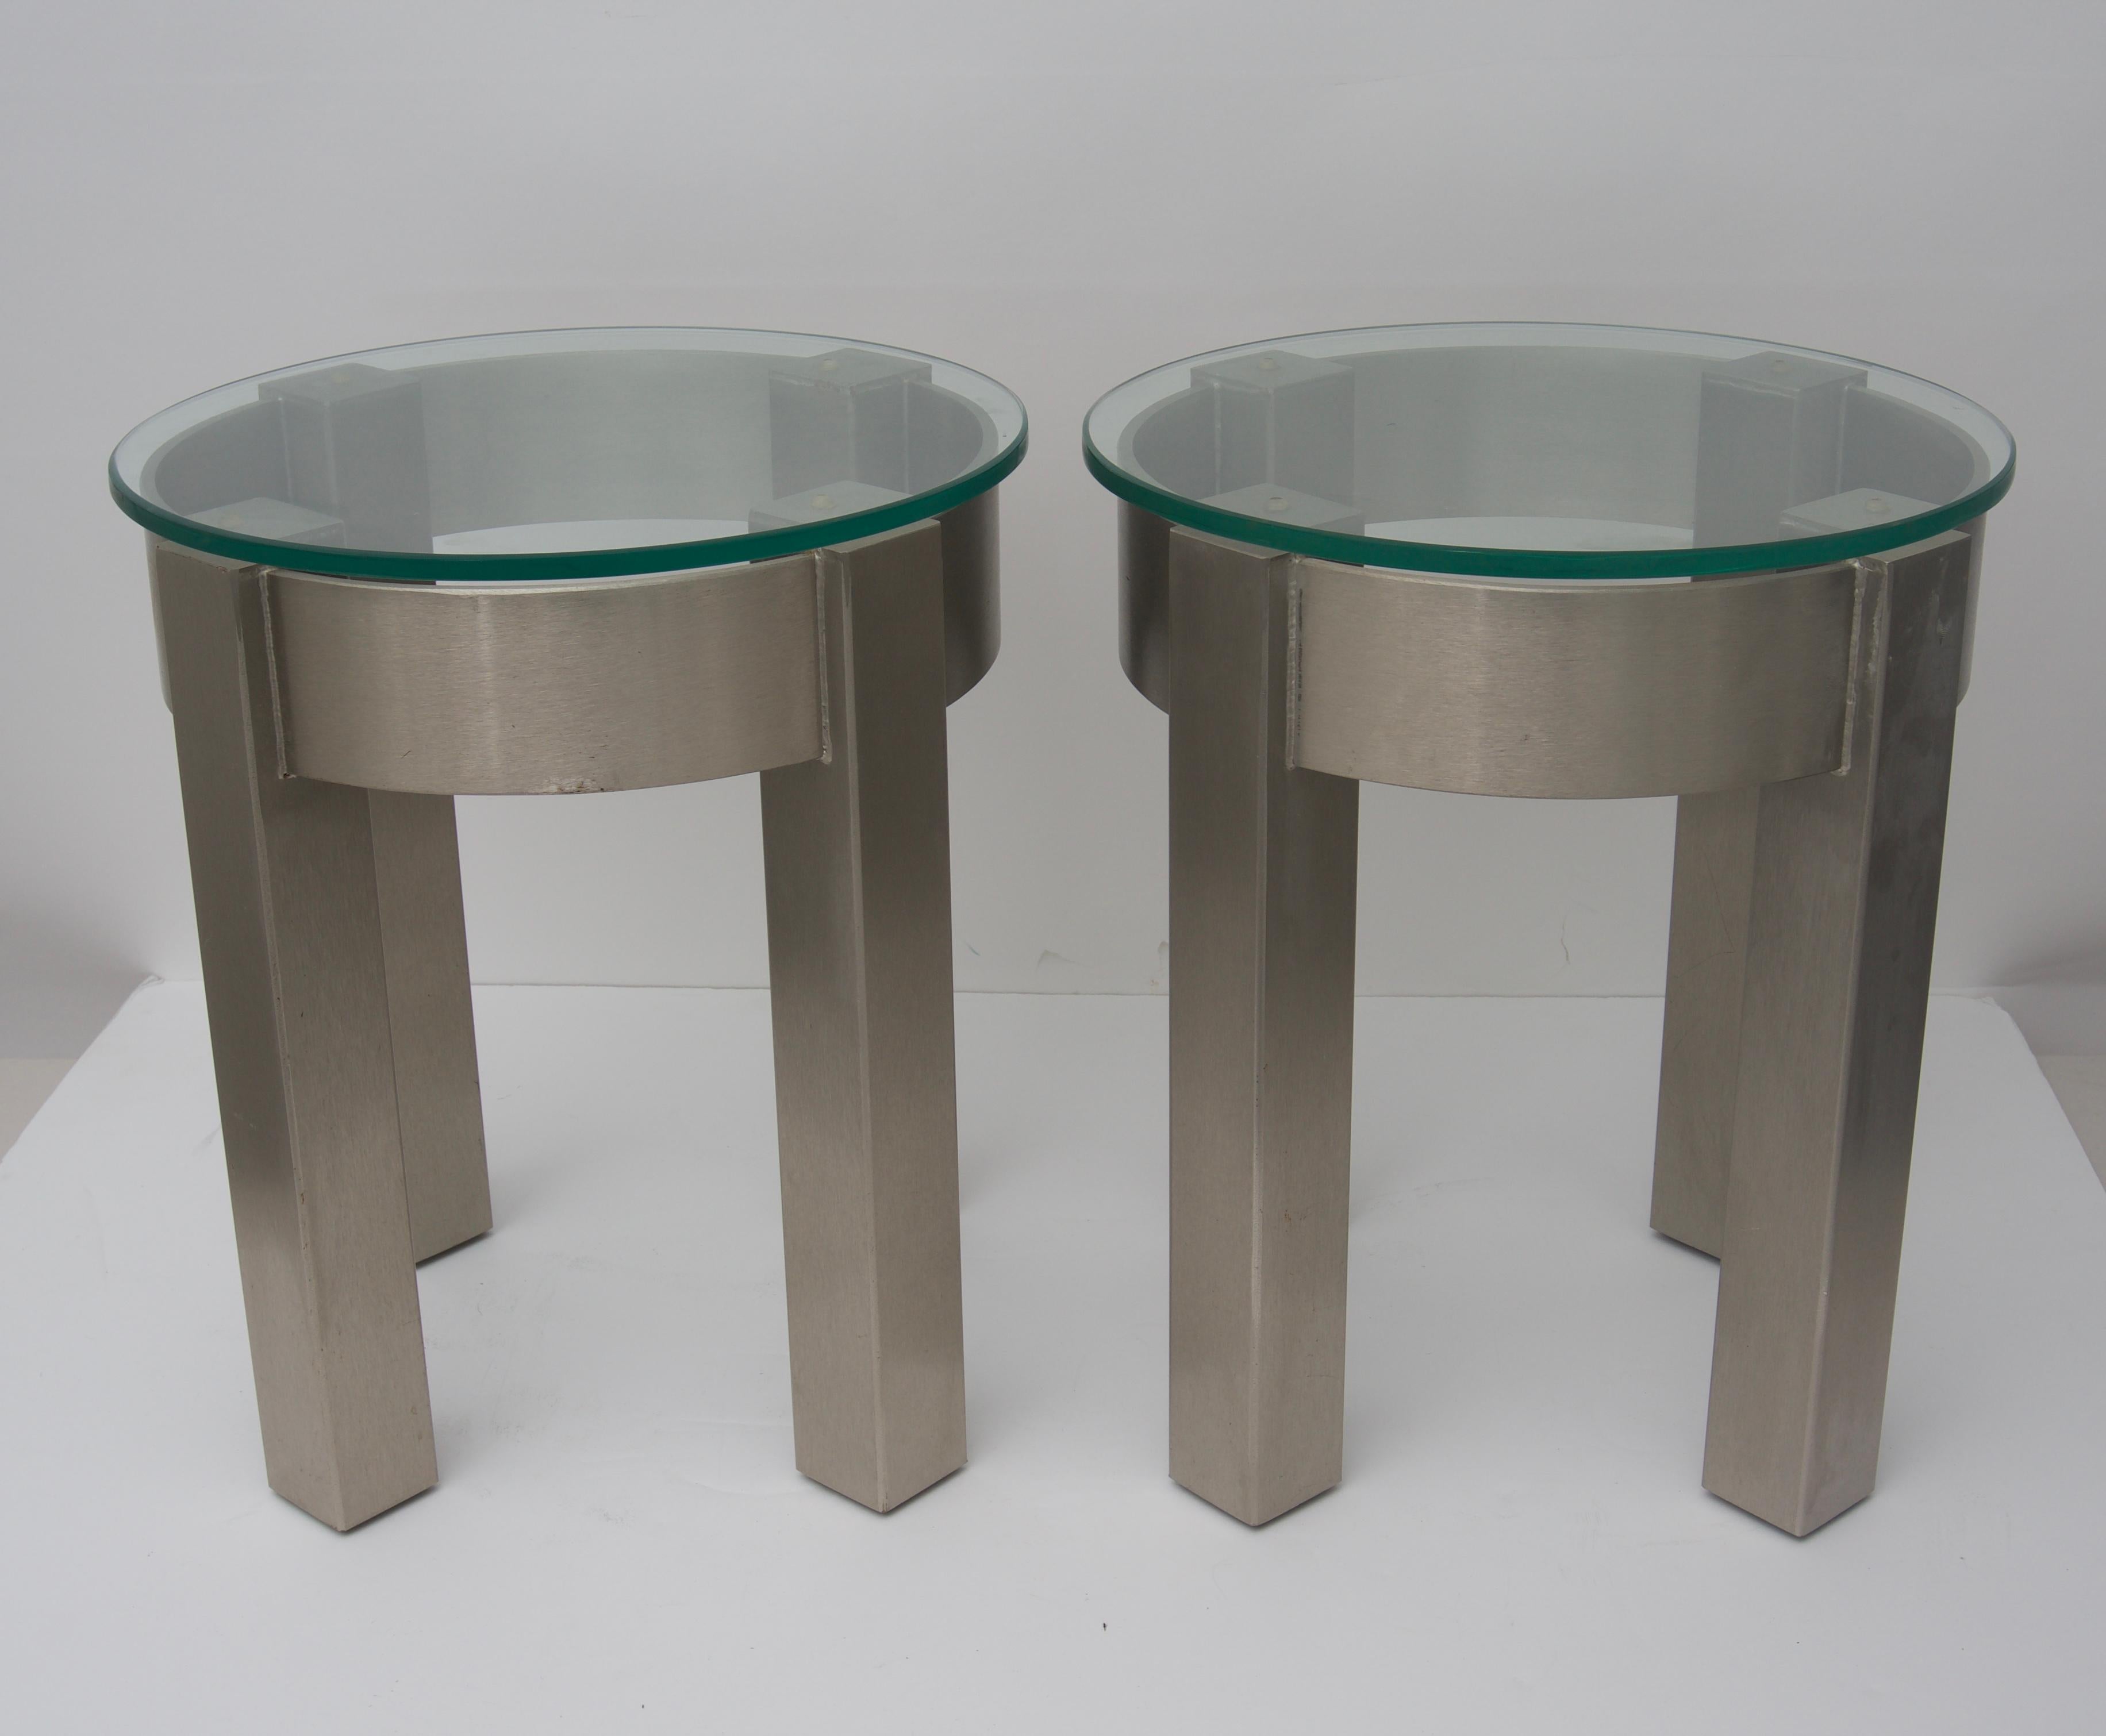 This stylish set of side tables are fabricated in stainless steel with removable glass tops.